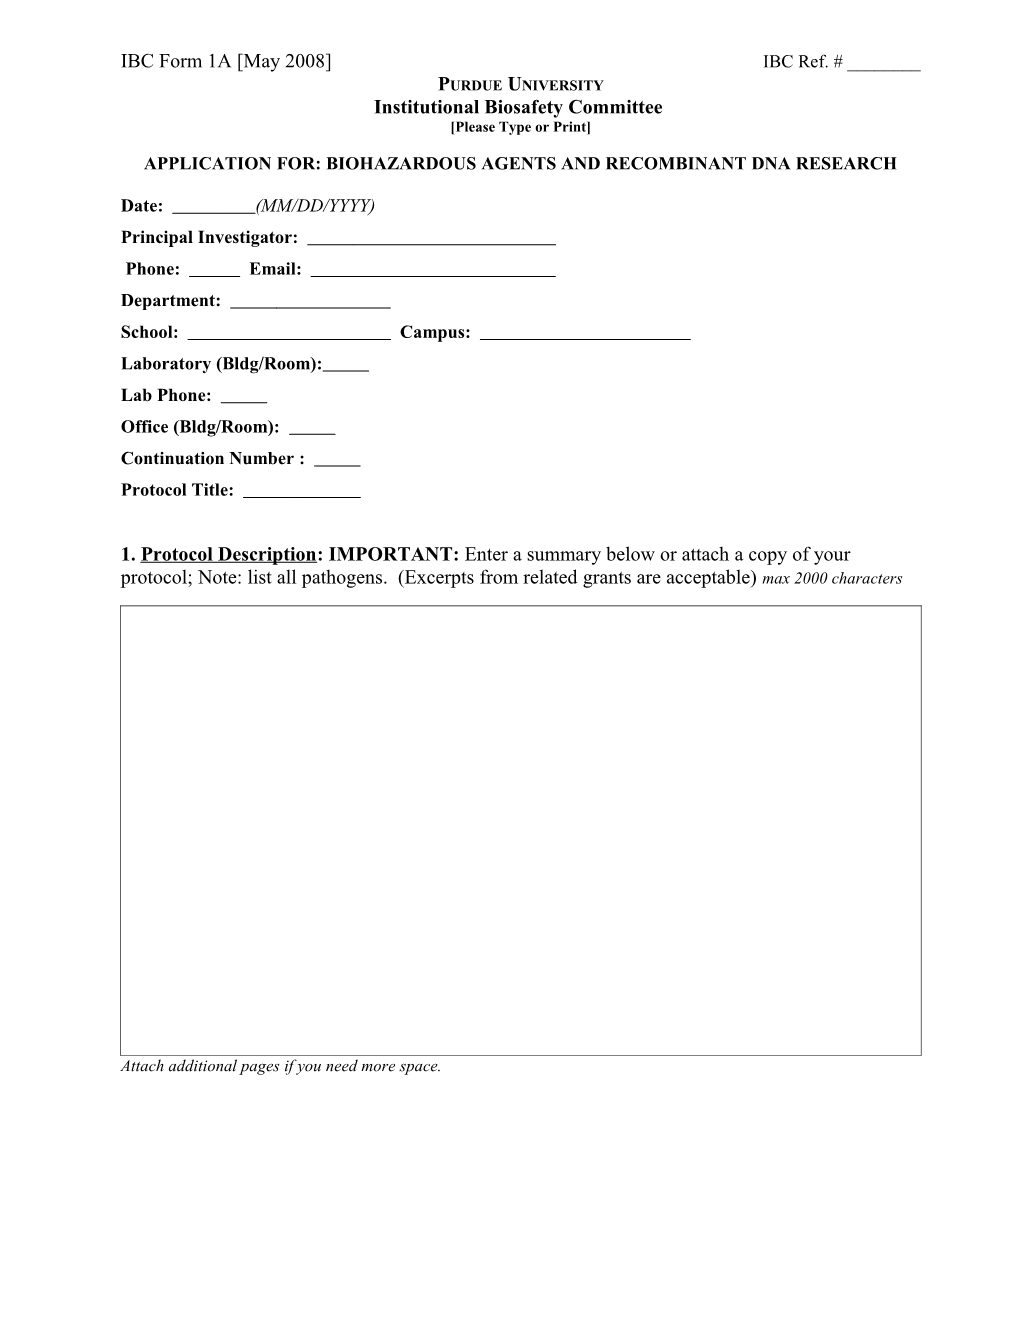 Application For: Biohazardous Agents and Recombinant Dna Research